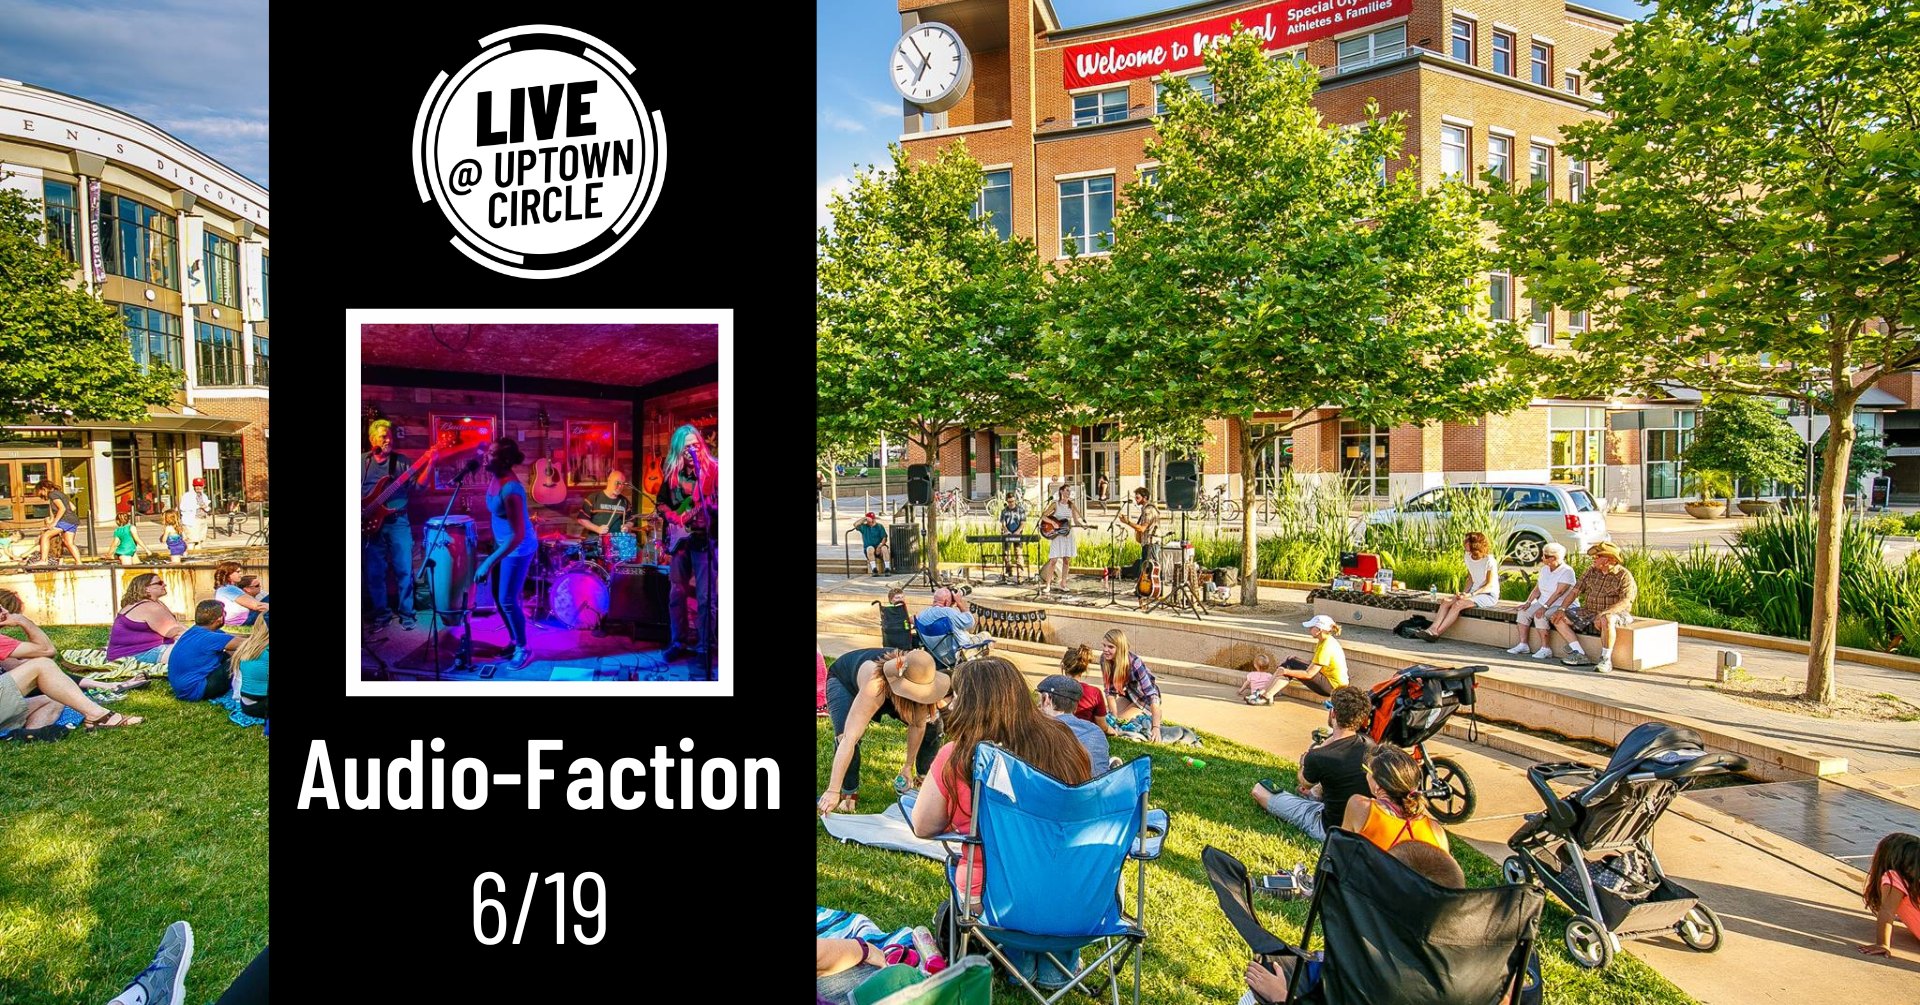 Normal LIVE presents Audio-Faction @ Uptown Circle